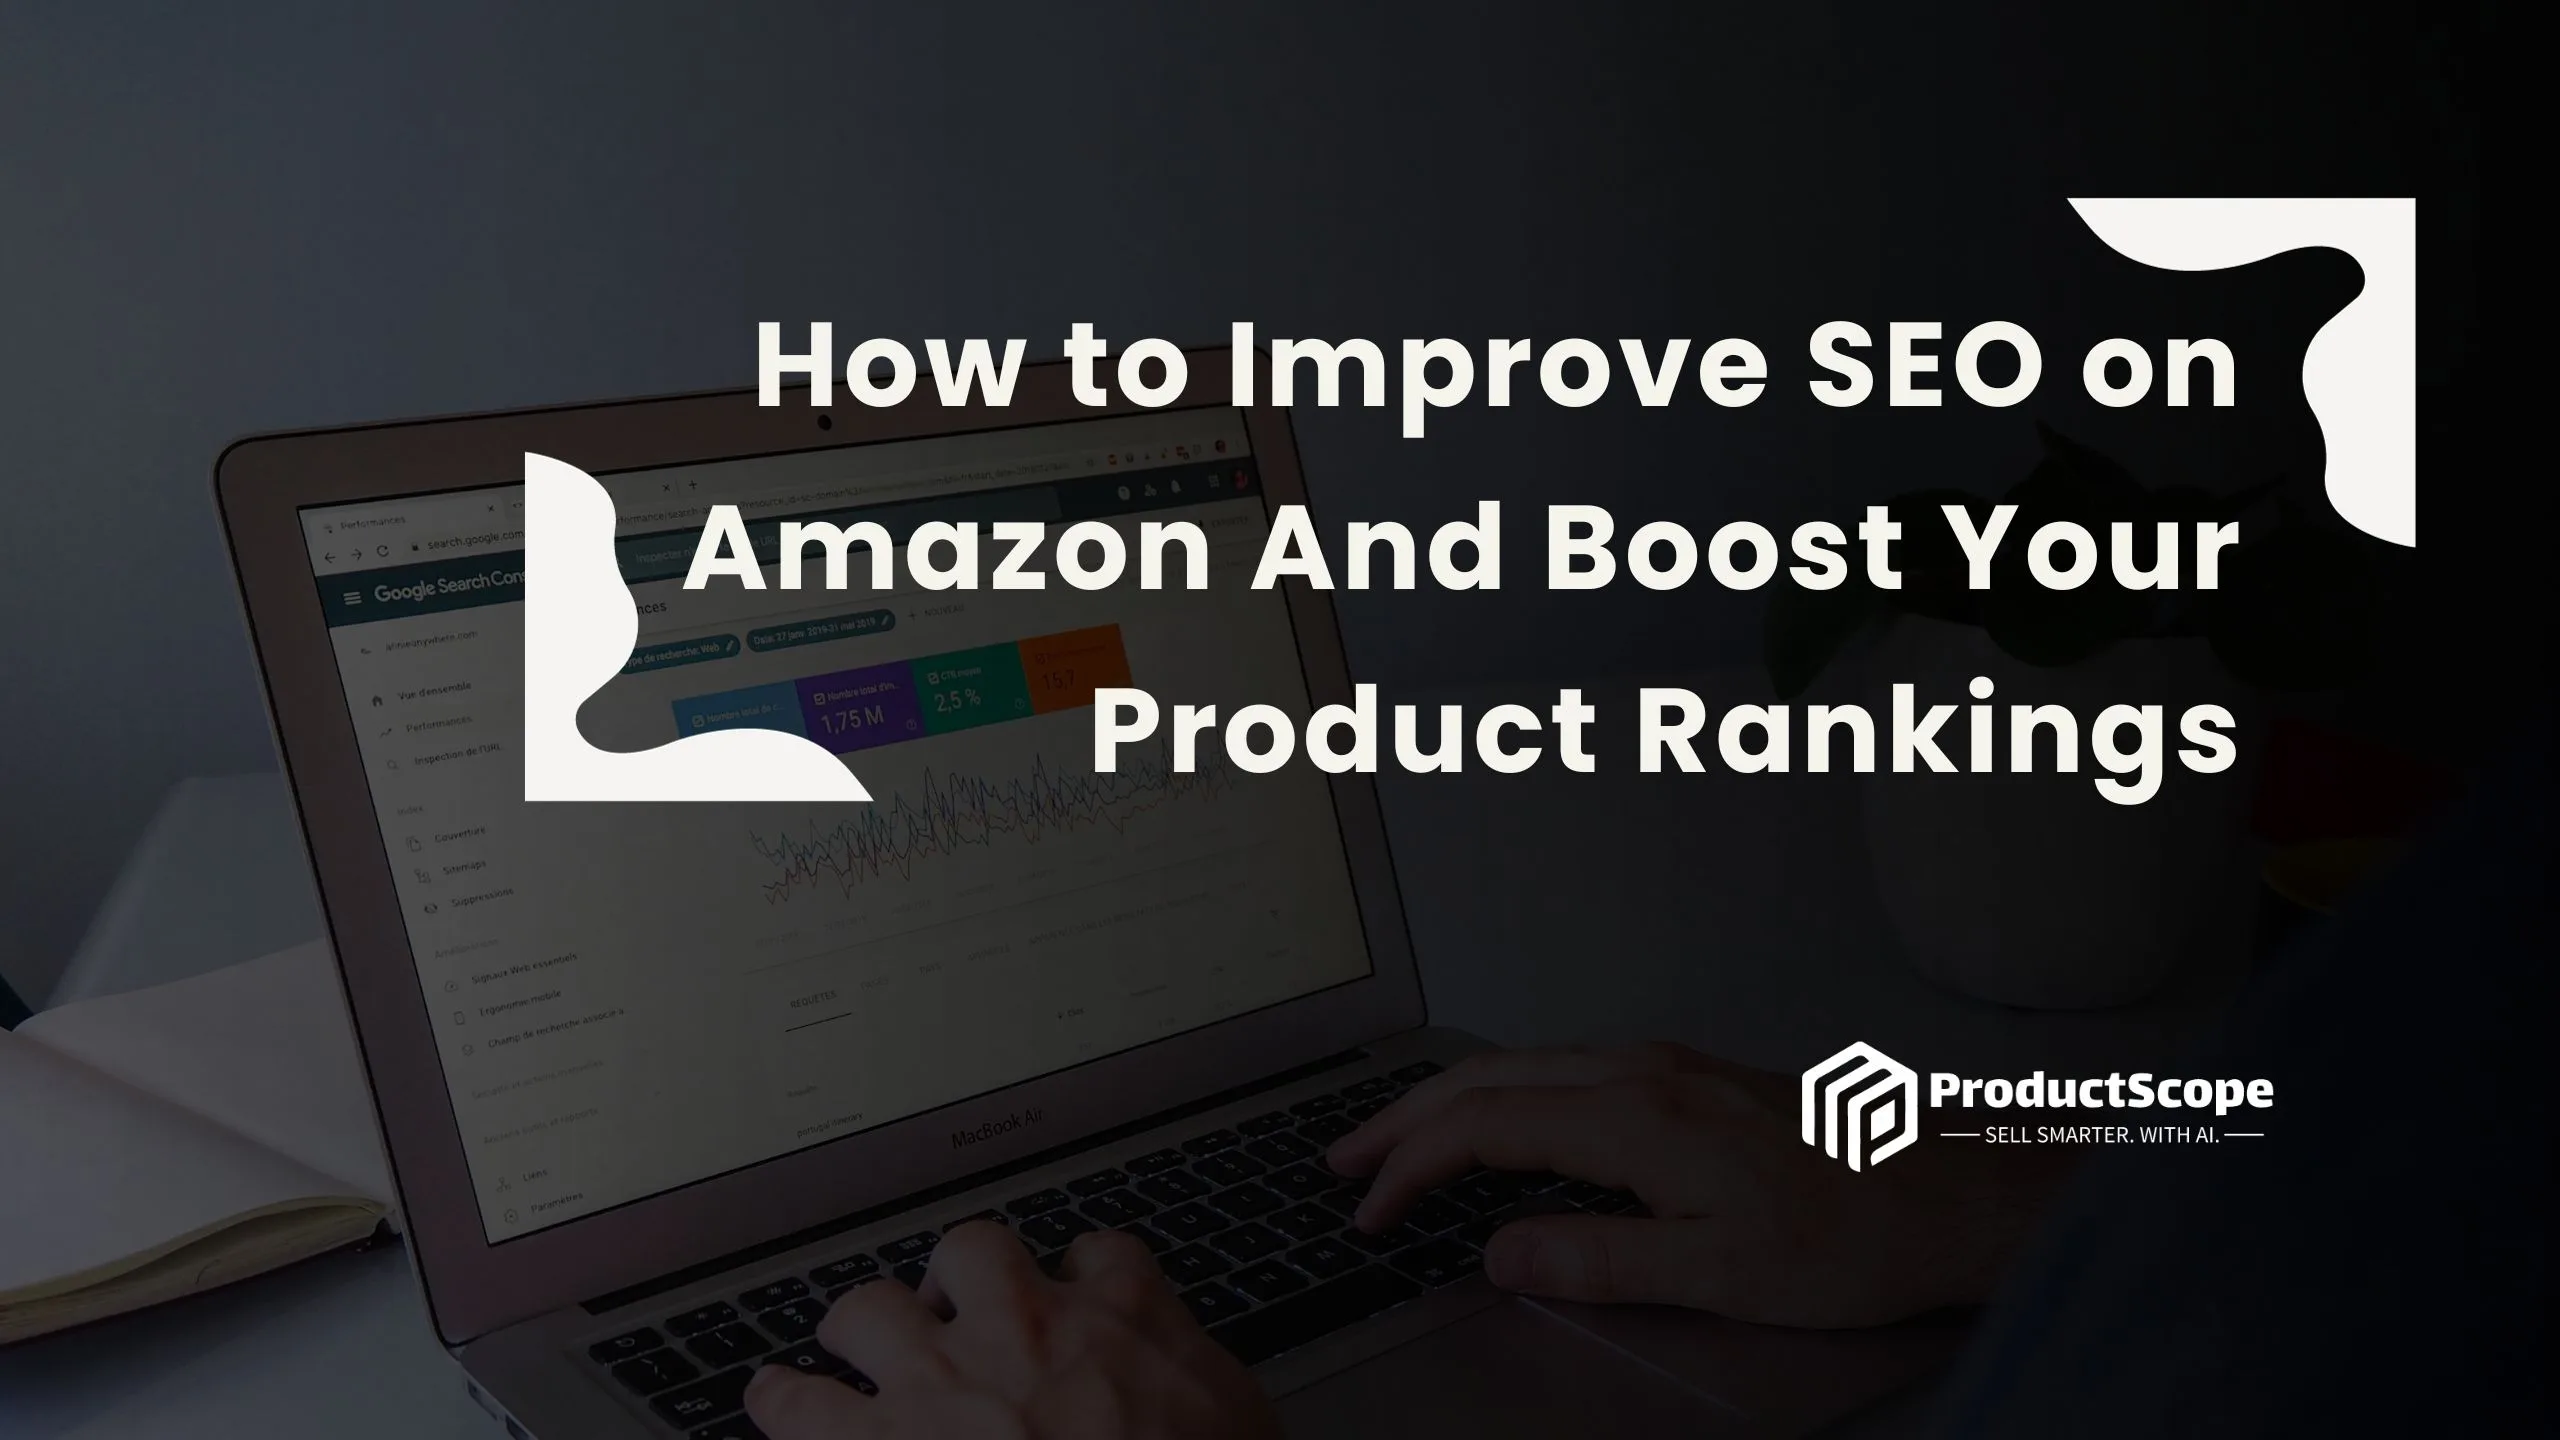 How to Improve SEO on Amazon And Boost Your Product Rankings